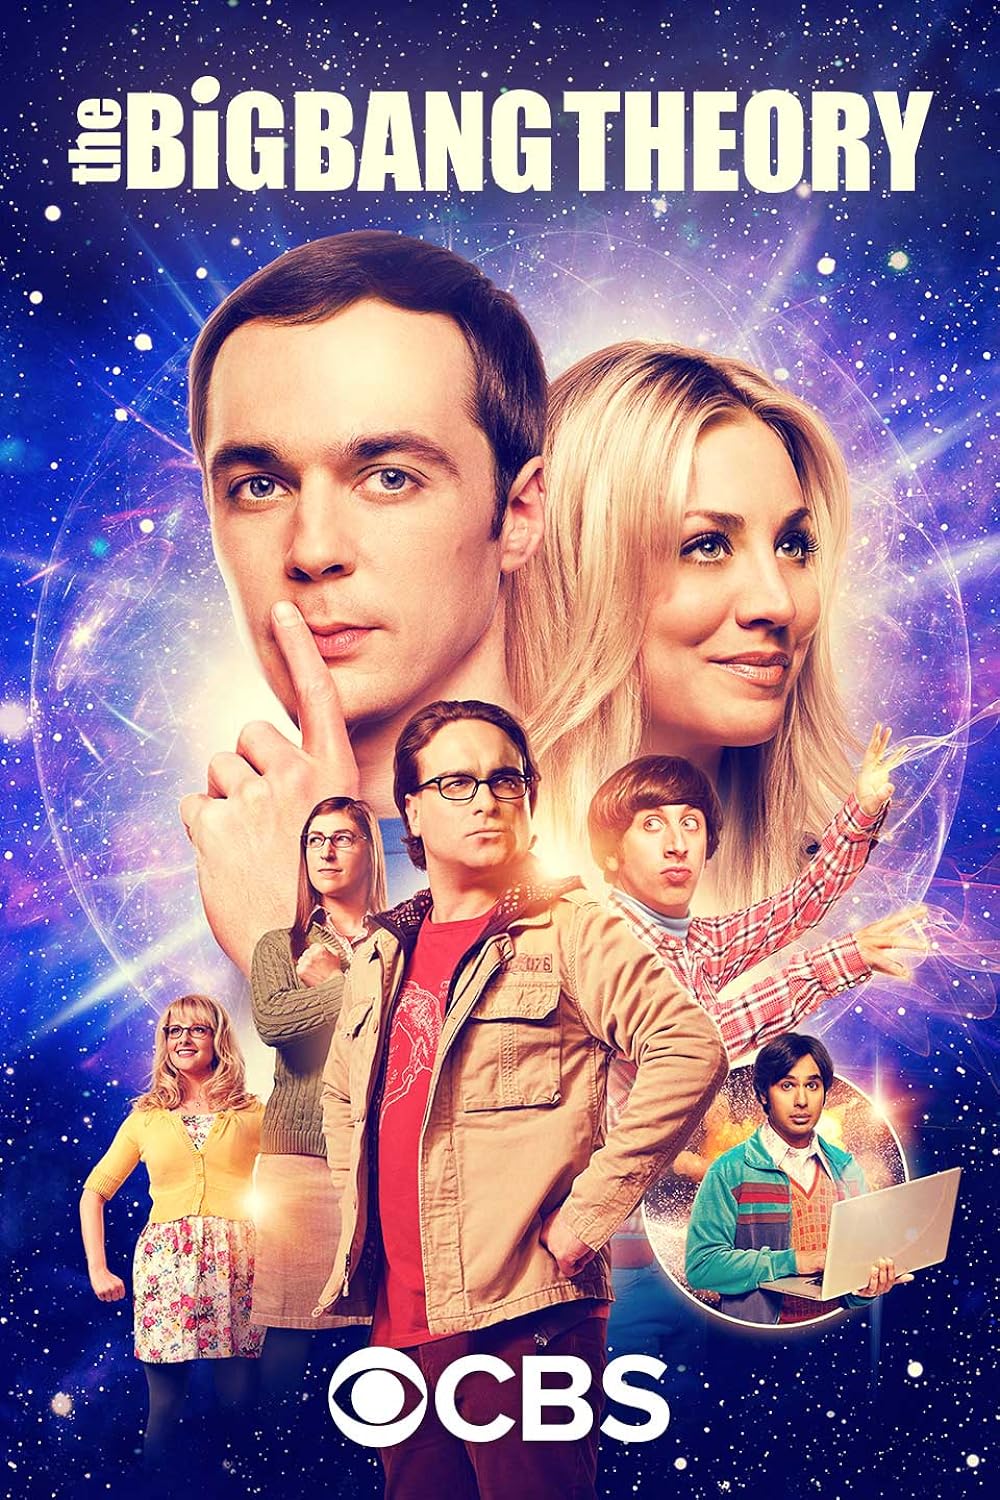 angela gainous recommends Fmovies Big Bang Theory